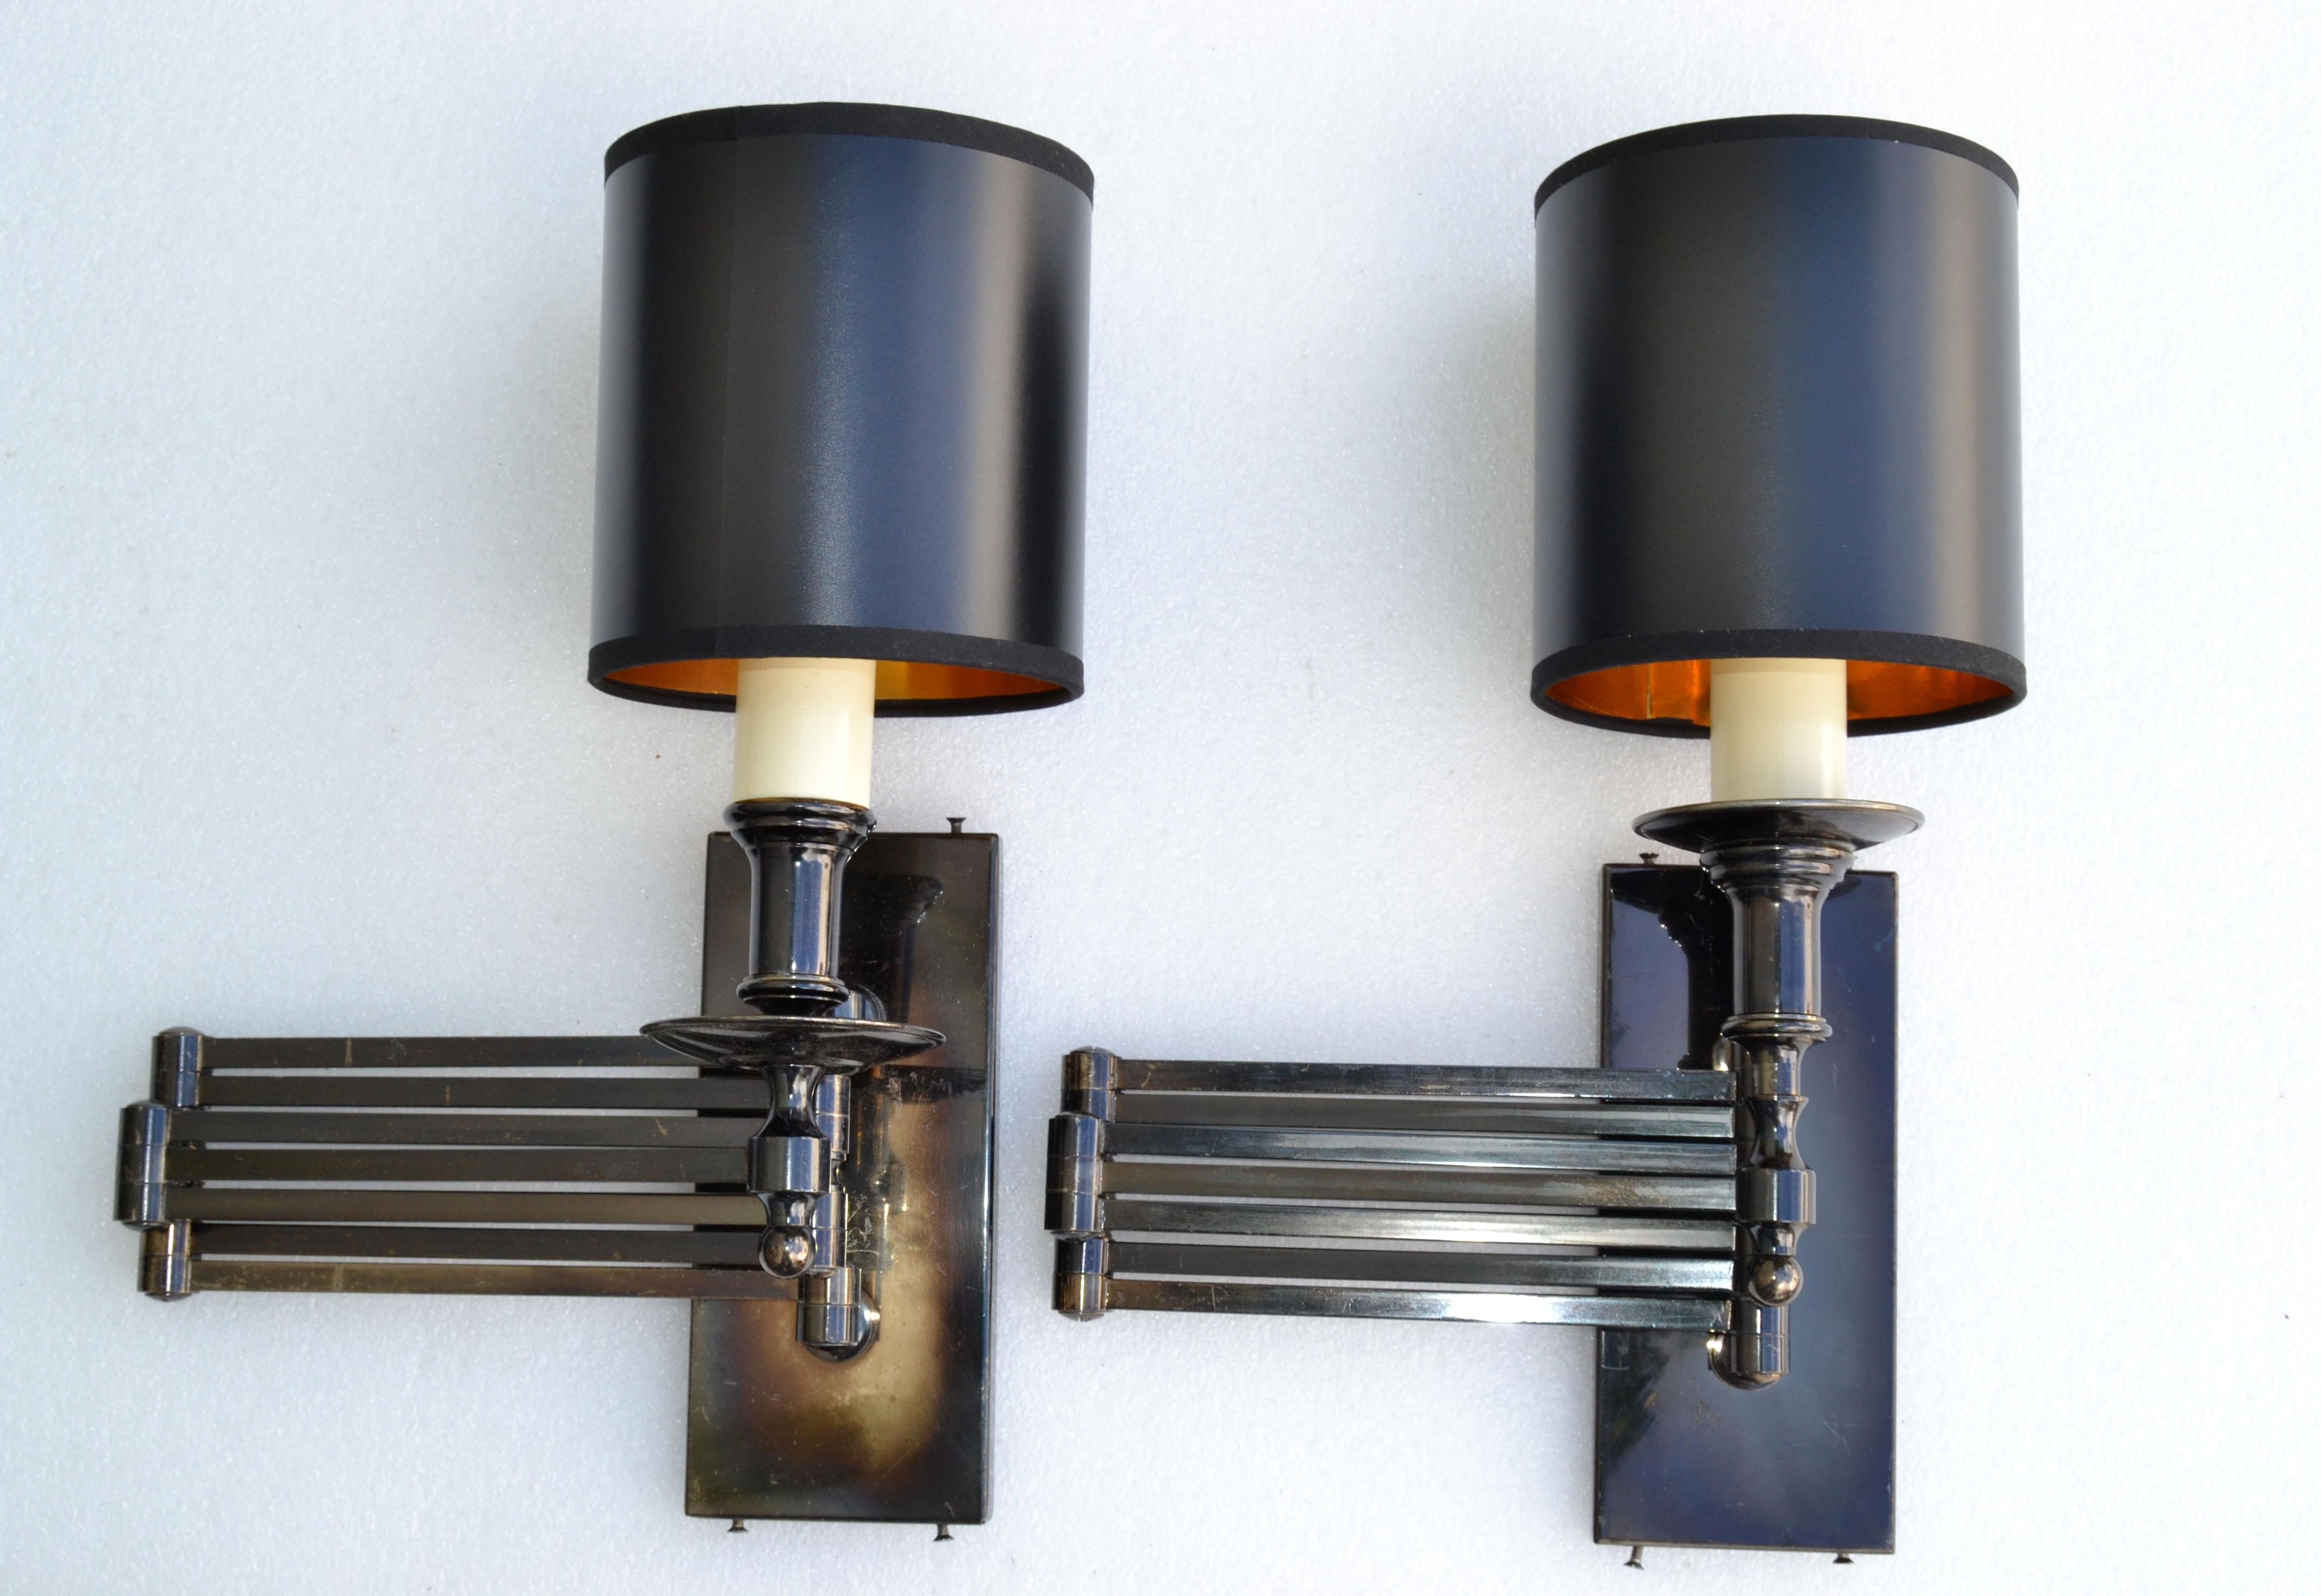 Unusual and impressive pair of very tall Maison Jansen retractable sconces.
Mid-Century Modern two-tone brass and gun metal wall lights made in France.
US Rewired and in working condition each take 1 regular or LED bulb. 
Dimension, max extended